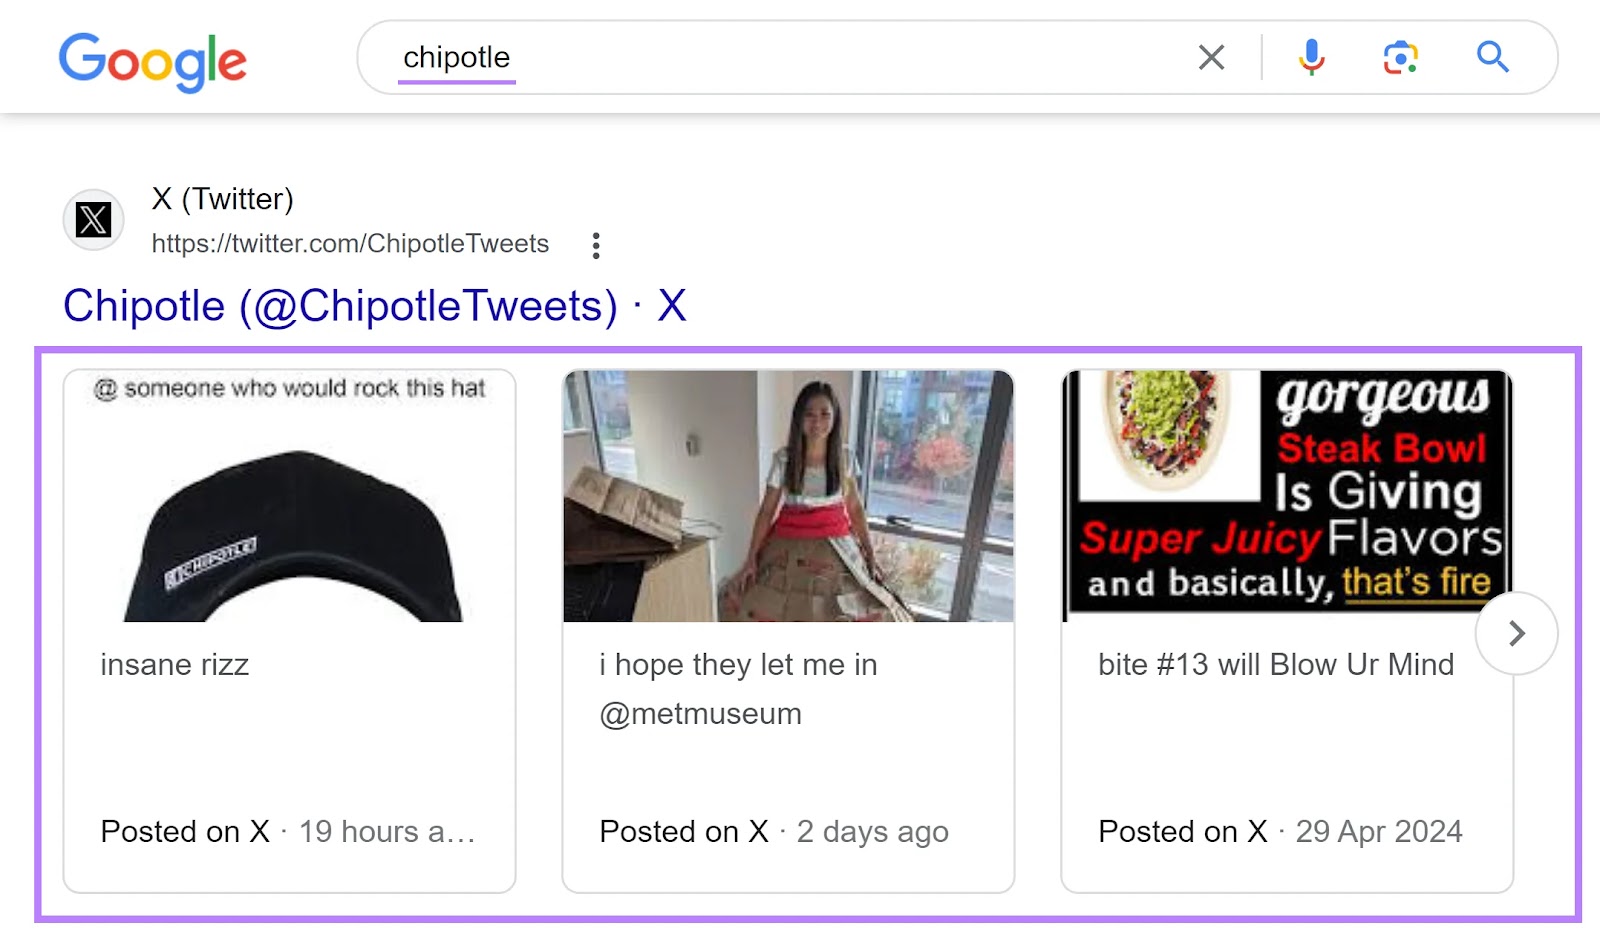 Google SERP of the "chipotle" keyword with X (Twitter) result showing three tweets.